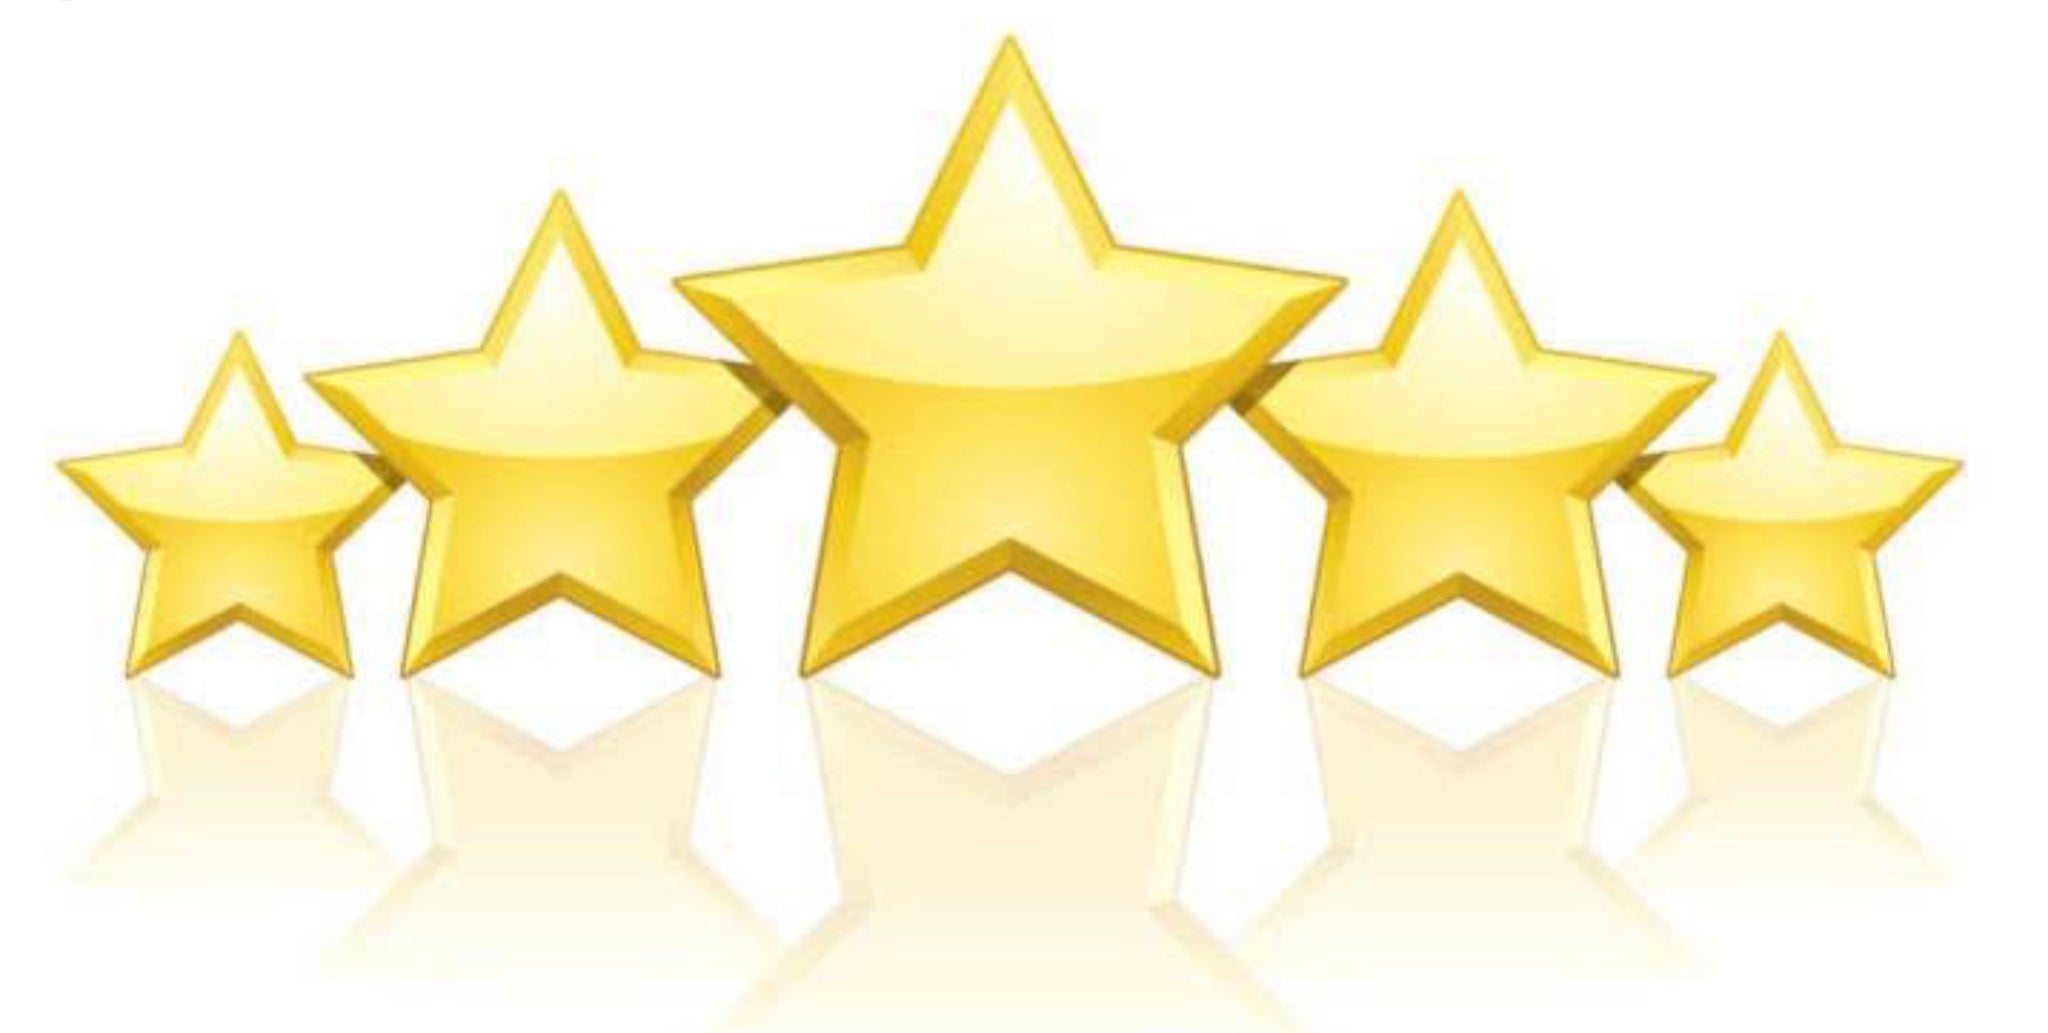 Sunbather/ Pool solar heating specialists ltd, Google reviews, see some feed back from our customers